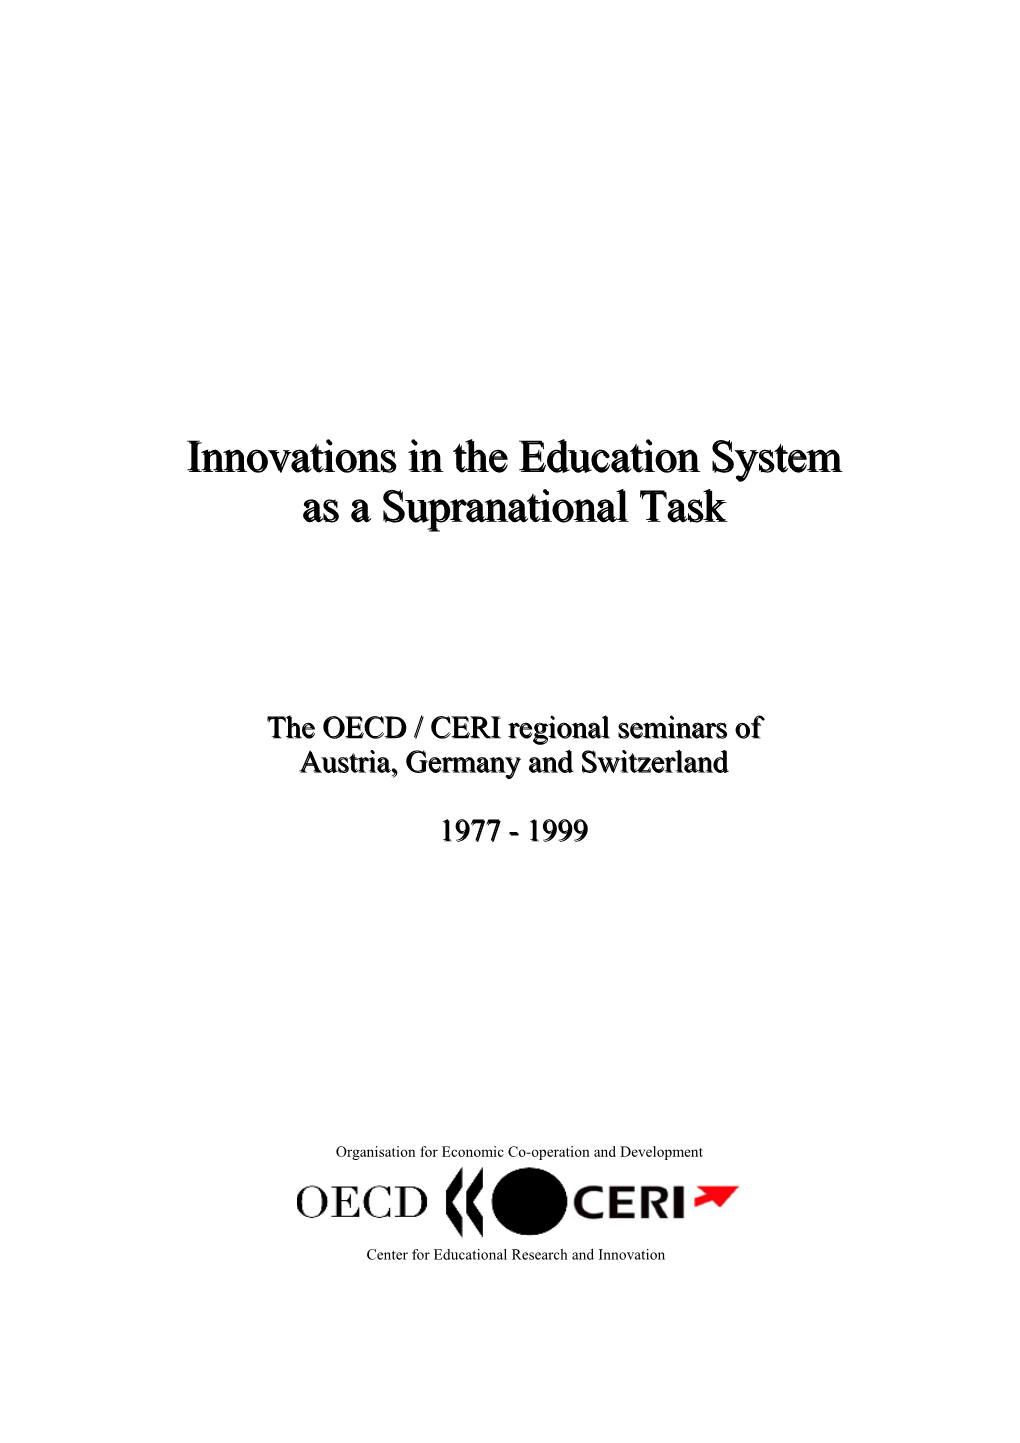 Innovations in the Education System As a Supranational Task